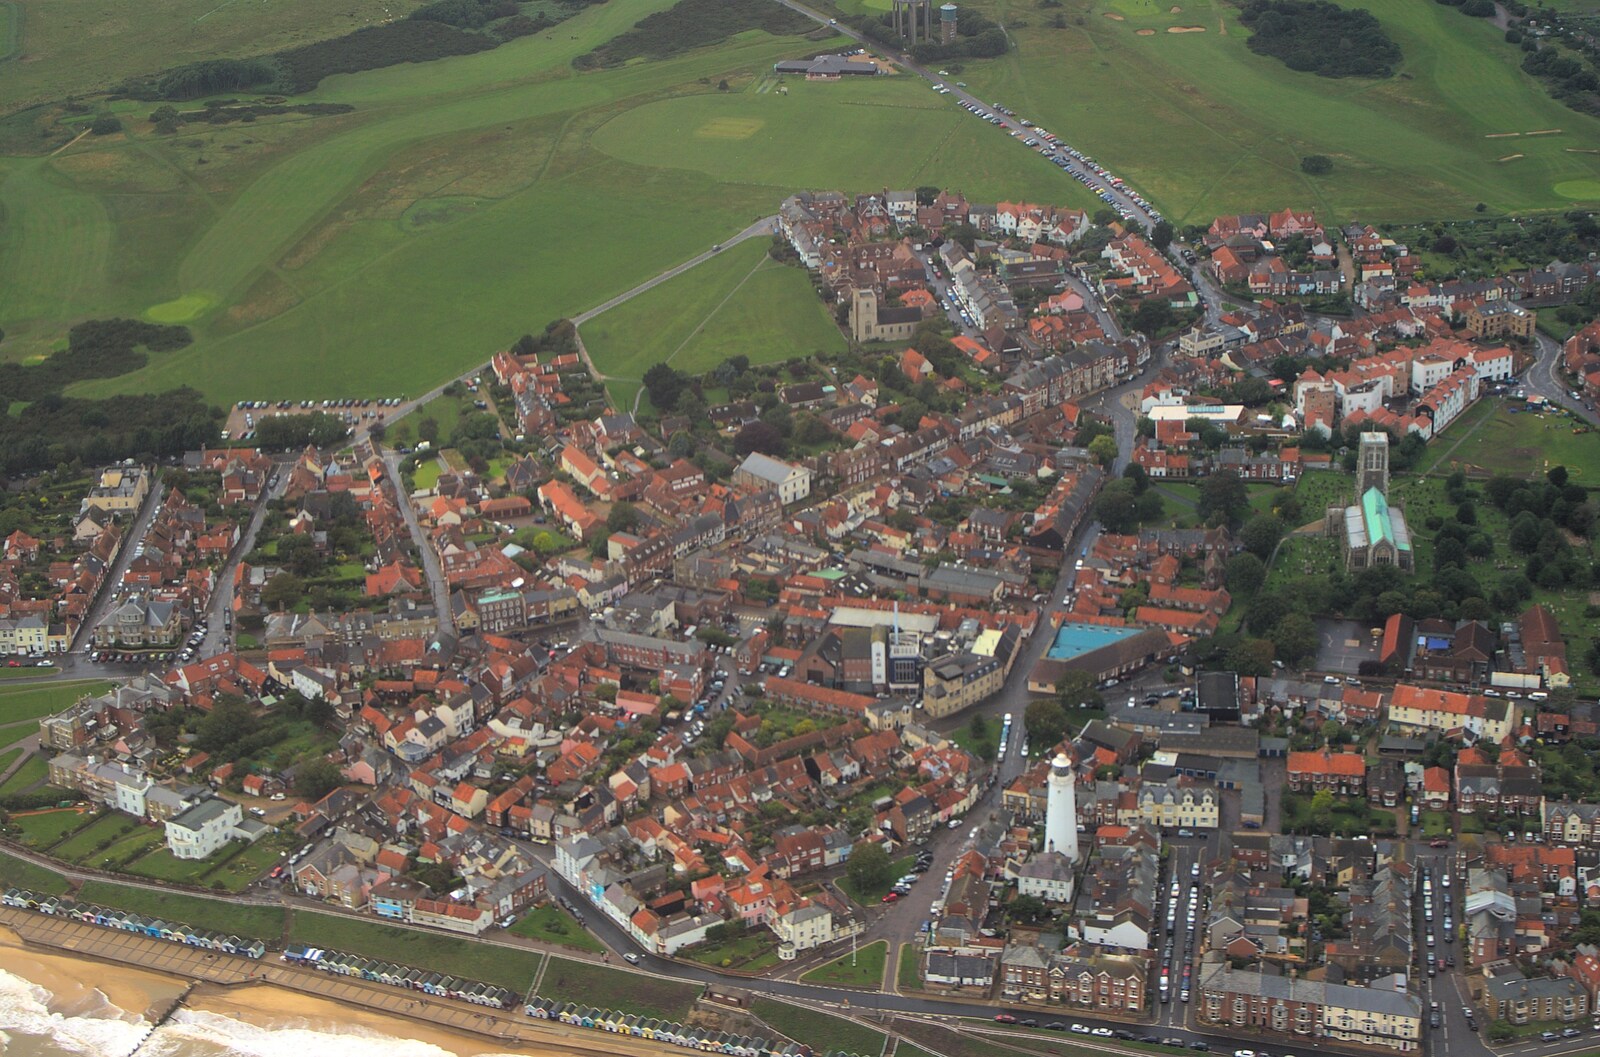 Another aerial view of Southwold and beach huts from Nosher Flies in a P-51D Mustang, Hardwick Airfield, Norfolk (and the Whole of Suffolk) - 17th July 2011